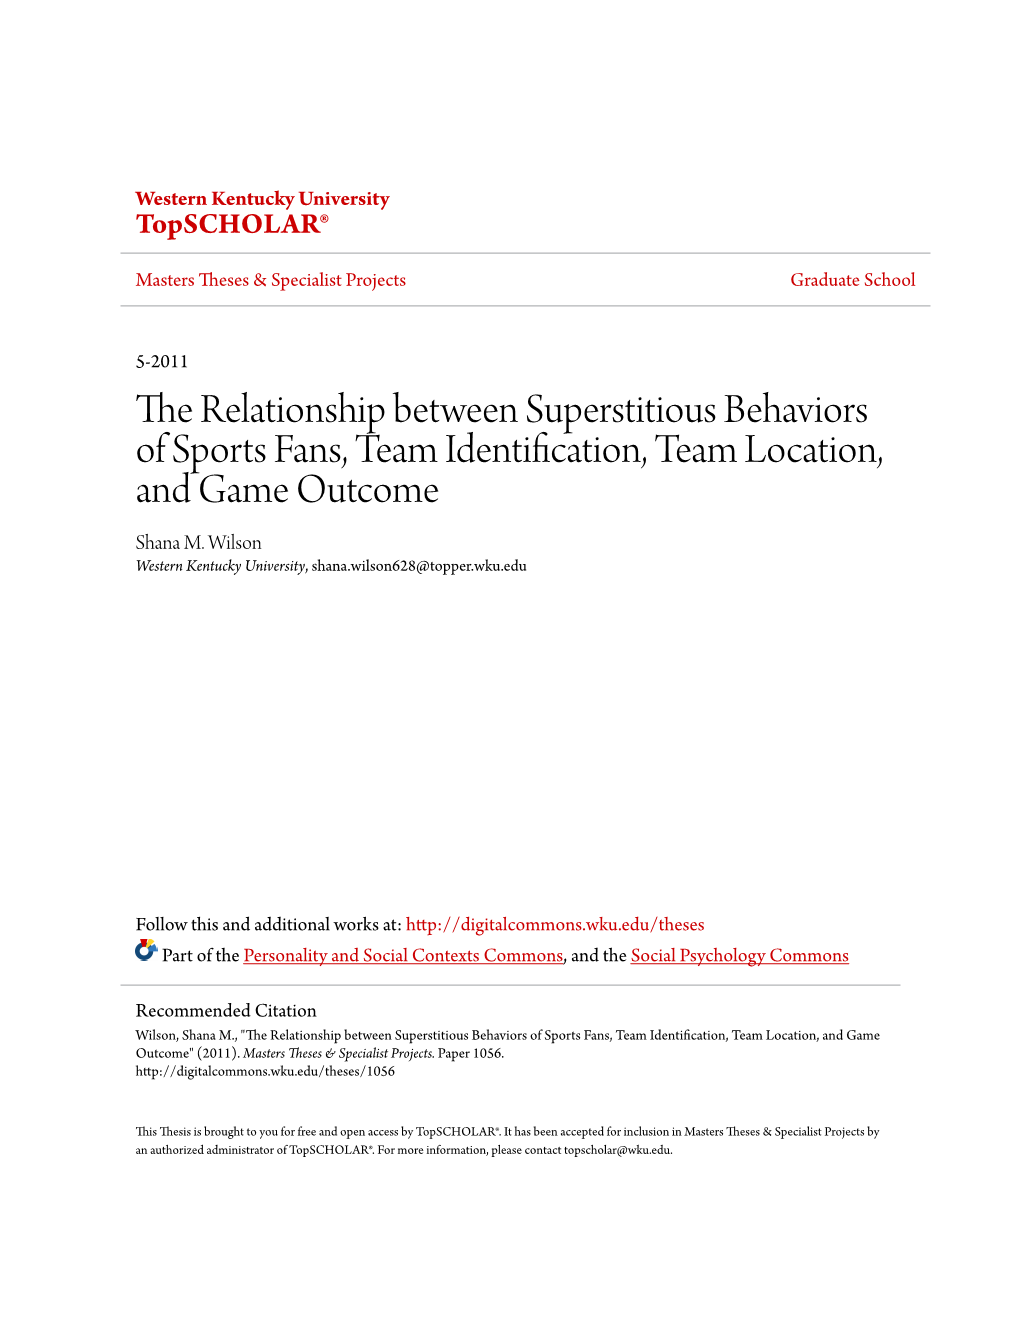 The Relationship Between Superstitious Behaviors of Sports Fans, Team Identification, Team Location, and Game Outcome Shana M